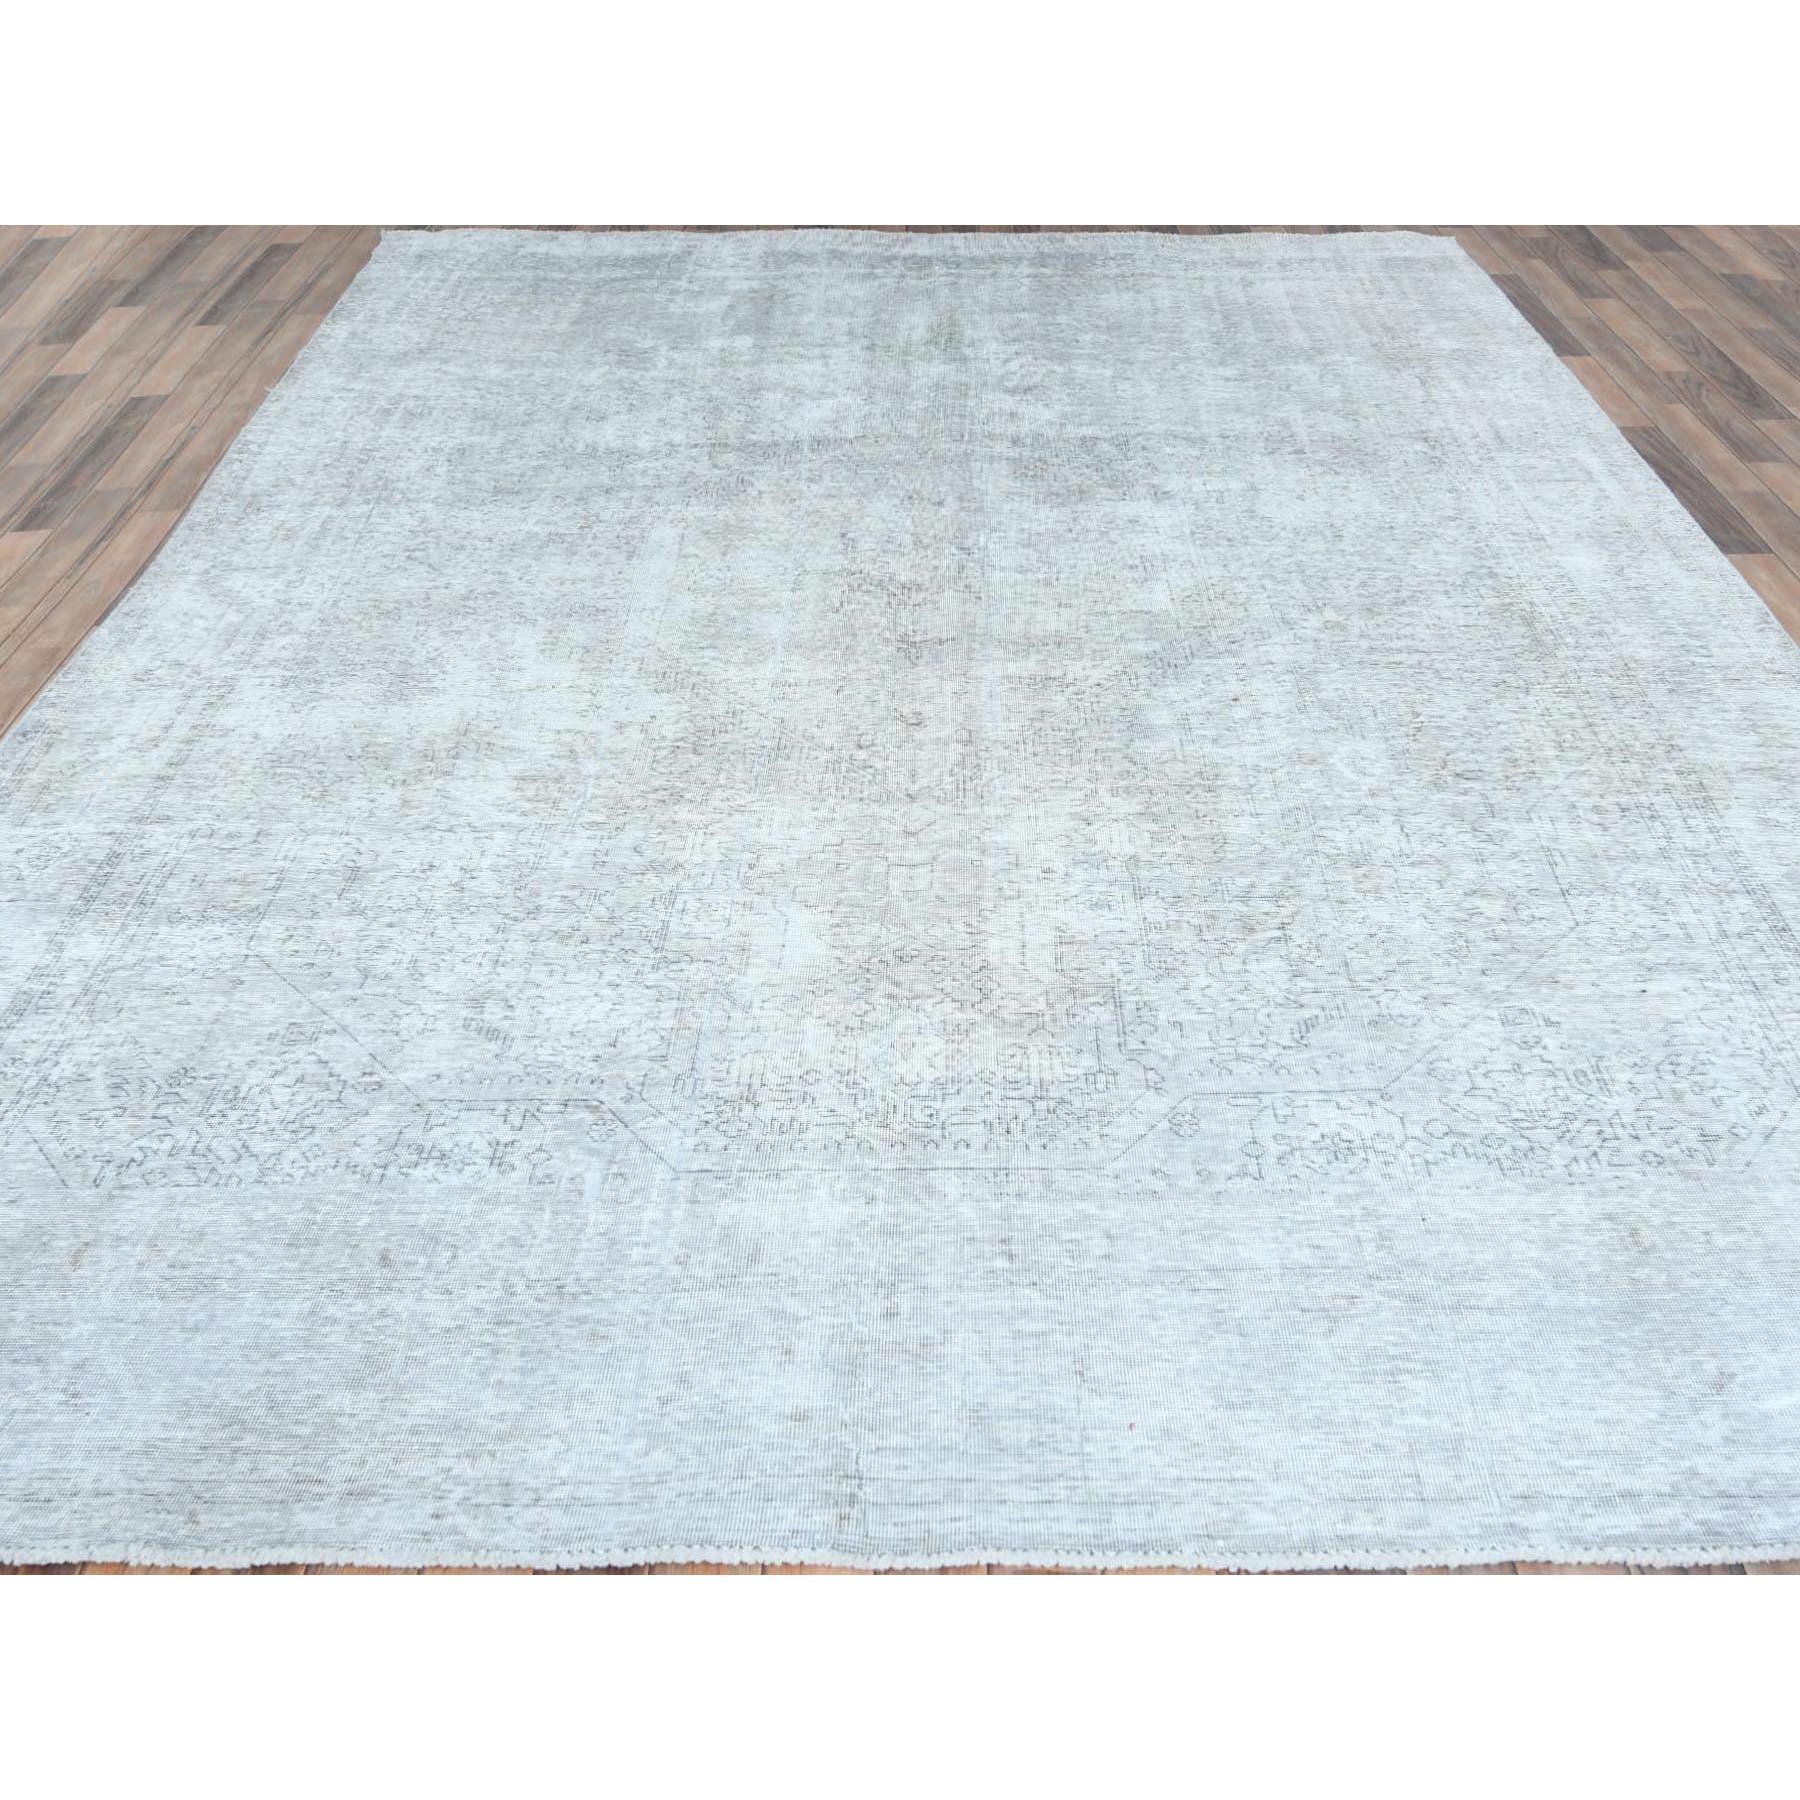 Medieval Light Grey Vintage Persian Tabriz Distressed Feel Worn Wool Hand Knotted Rug For Sale